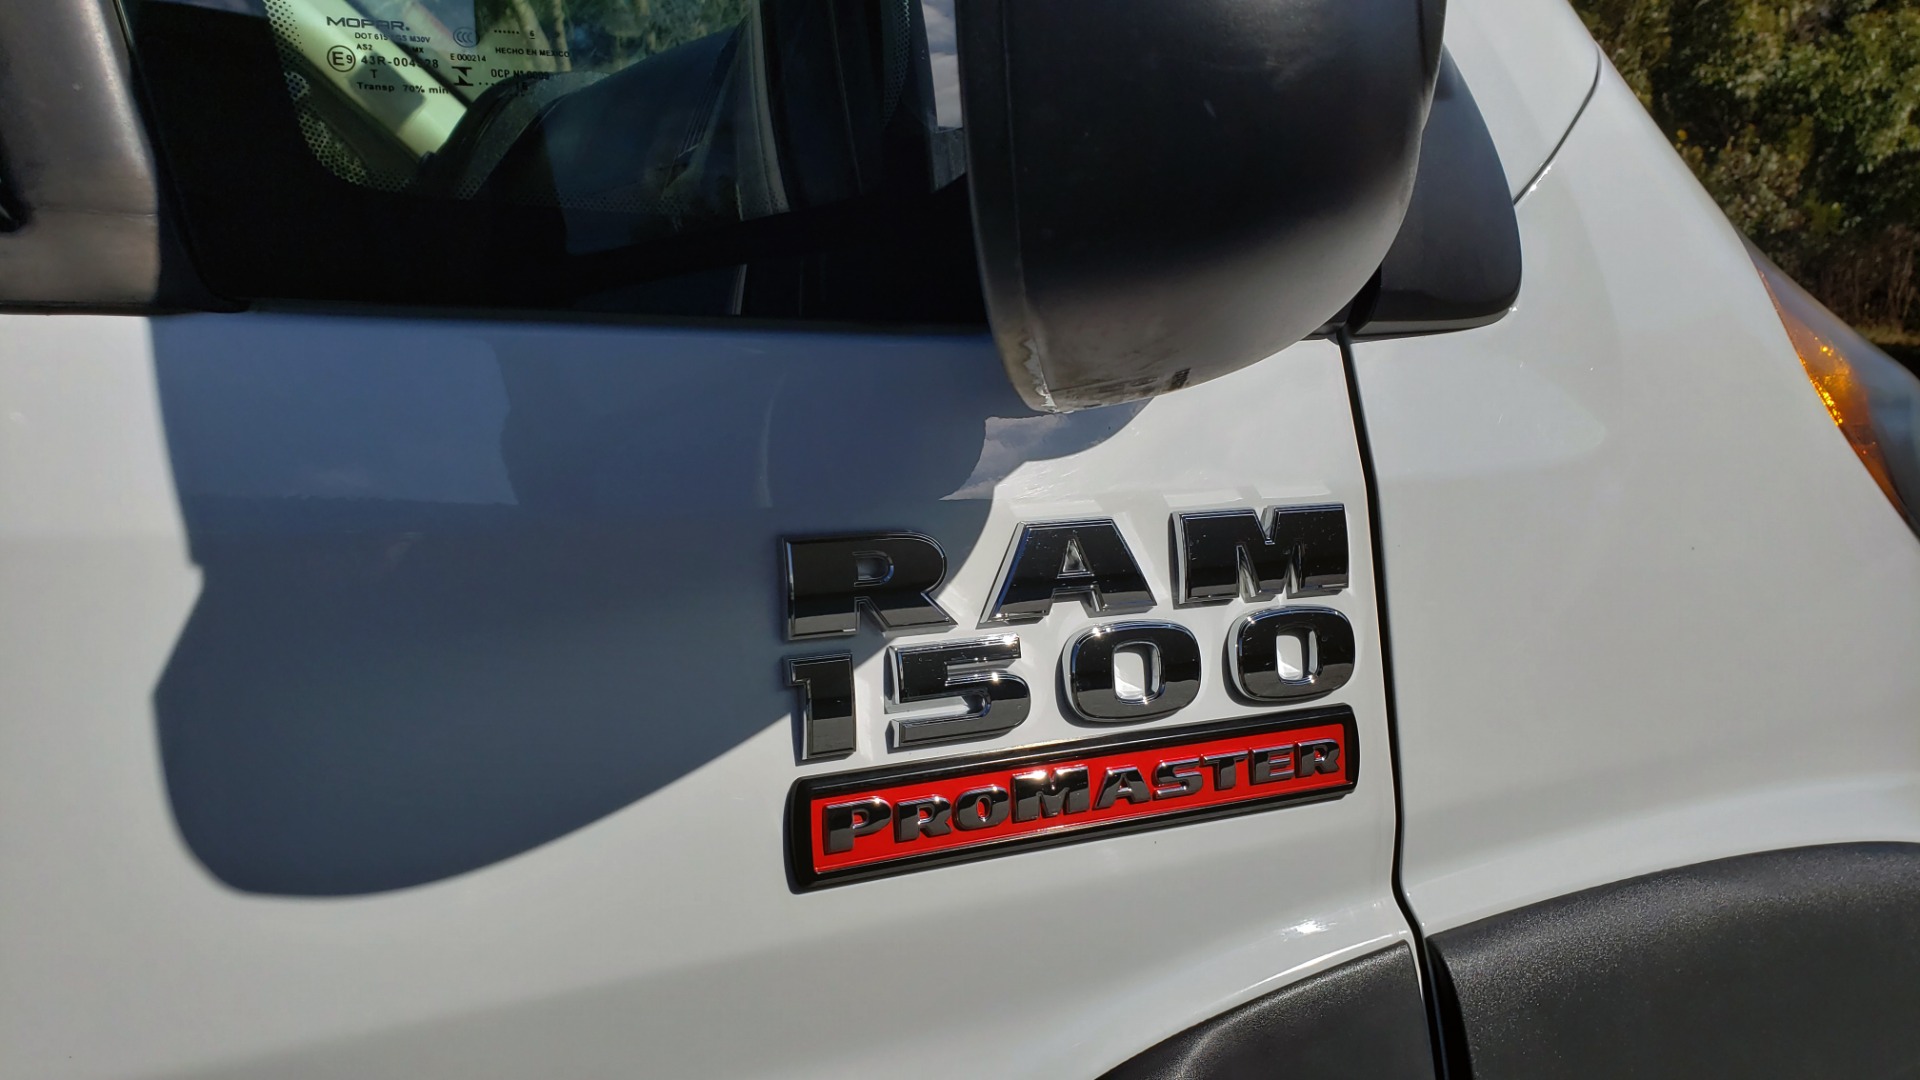 Used 2016 Ram PROMASTER CARGO VAN 136 WB / LOW ROOF / 3.6L V6 / 6-SPD AUTO / REARVIEW for sale Sold at Formula Imports in Charlotte NC 28227 11